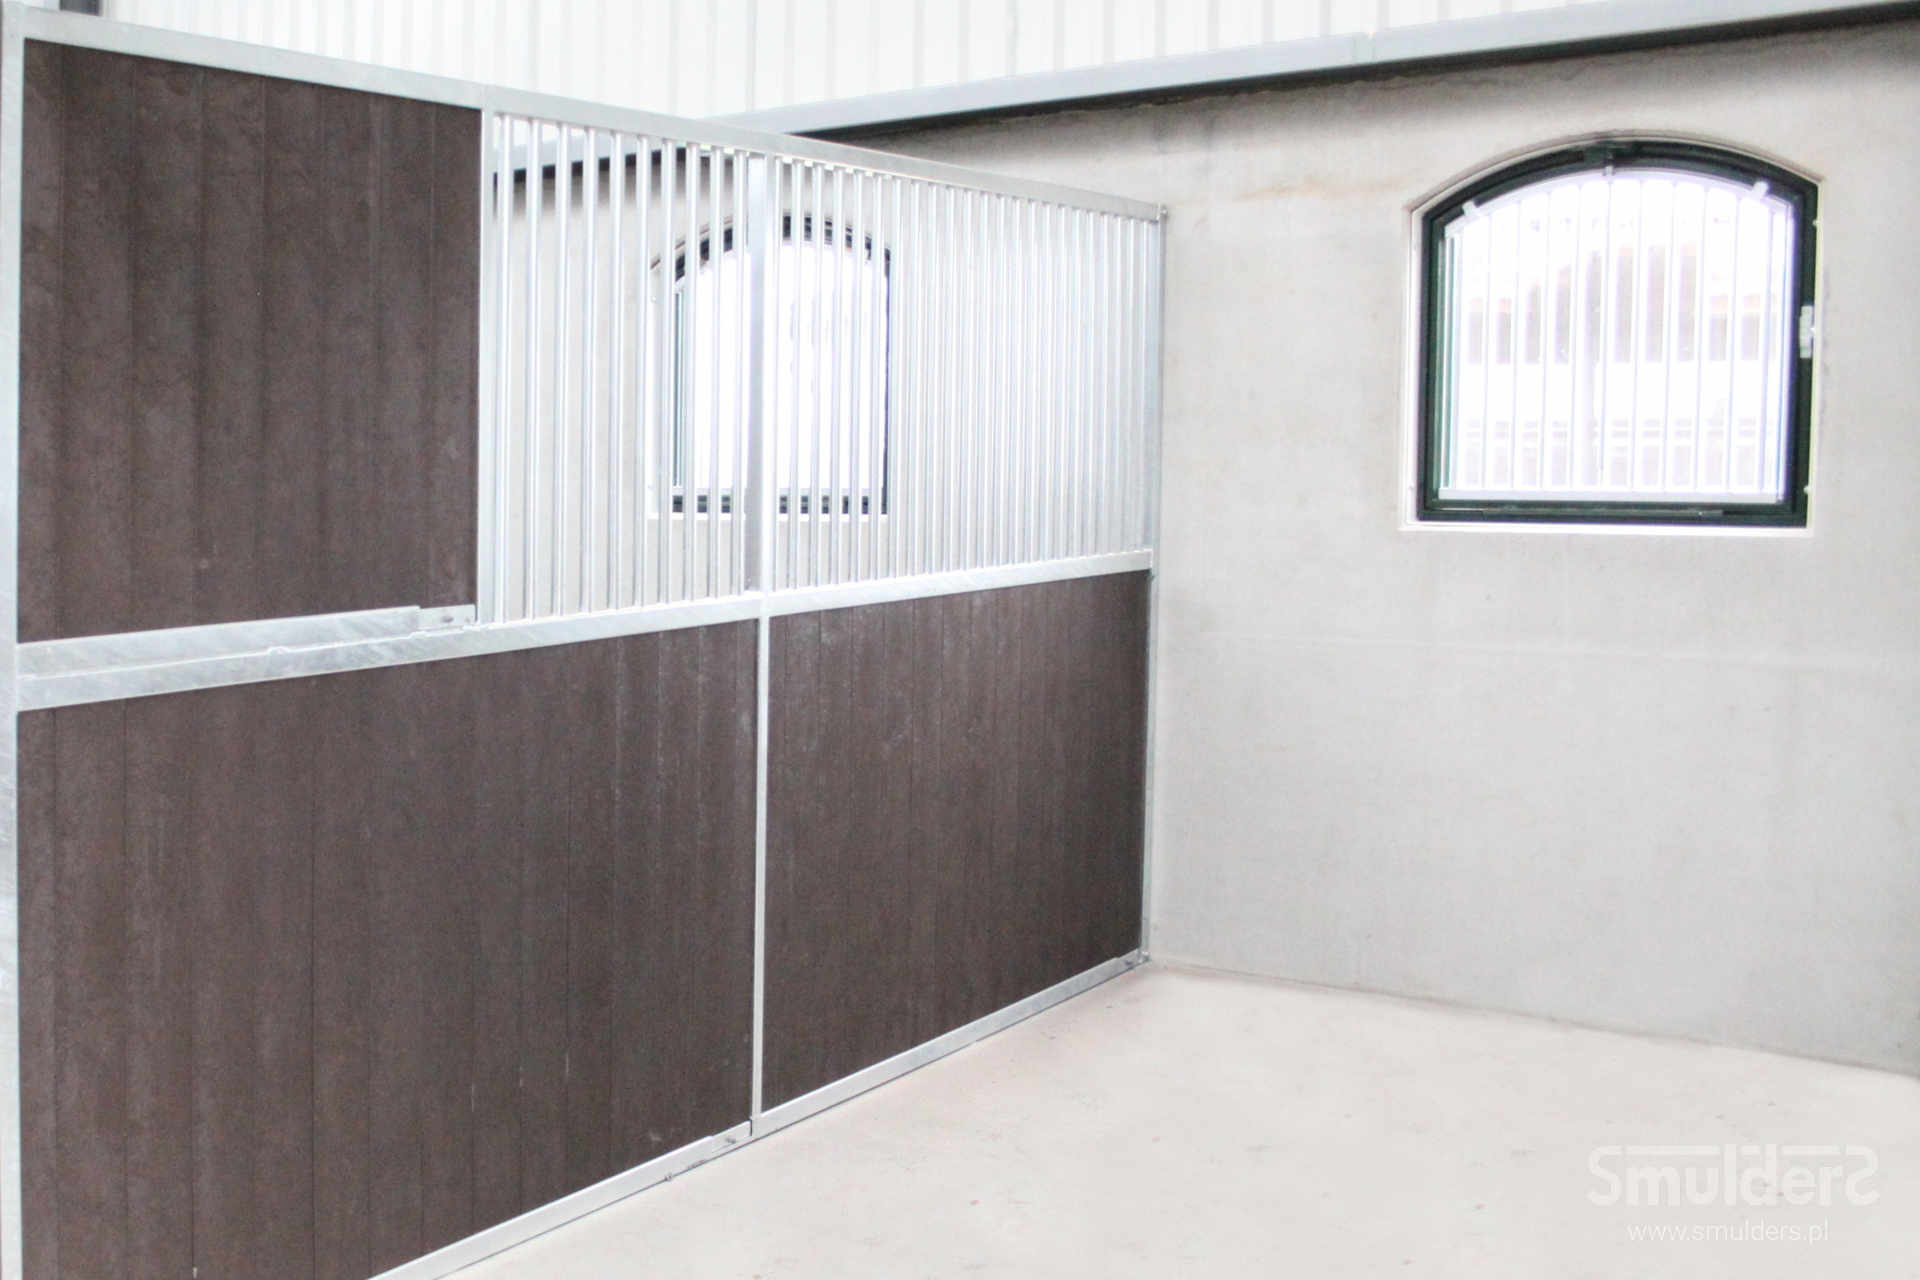 Professional-Series divider with privacy panel